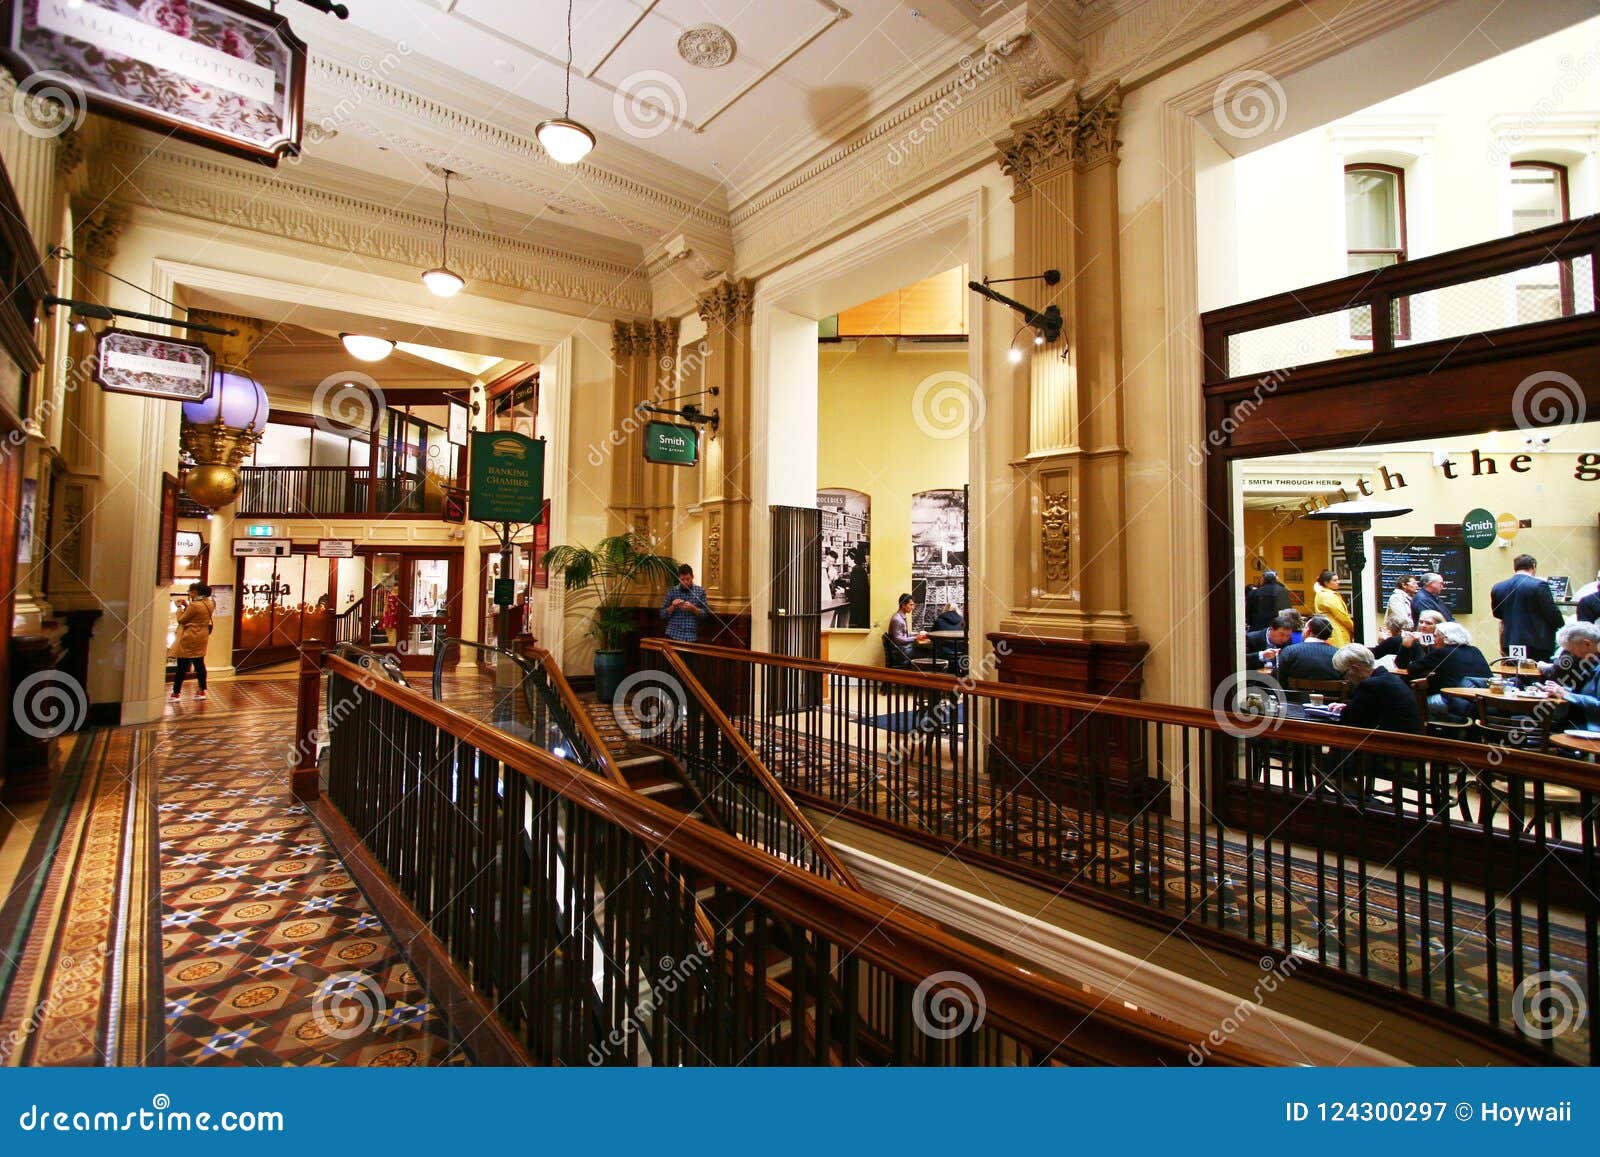 Featured image of post Old Bank Interior Photos / 640 x 427 jpeg 148 кб.